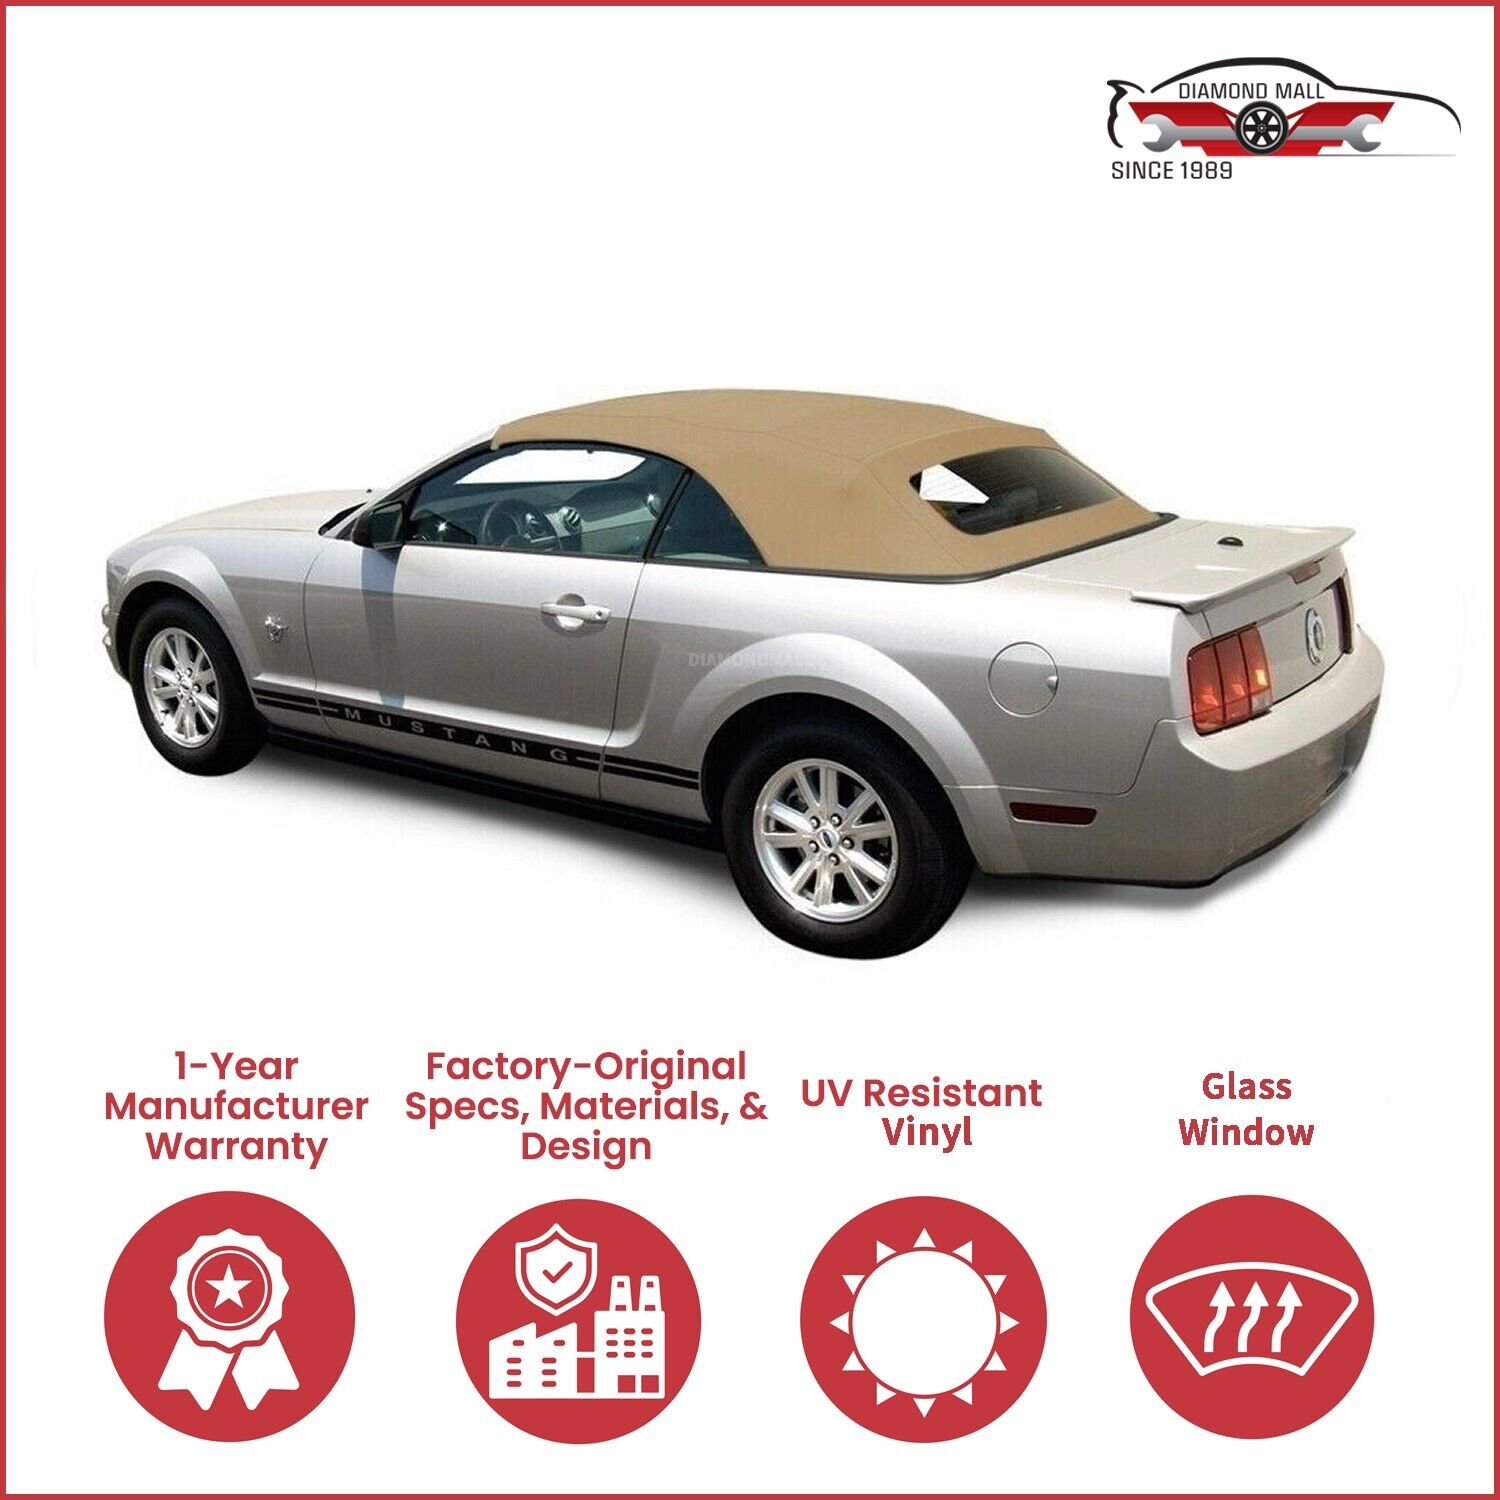 2005-14 Ford Mustang Convertible Soft Top w/ DOT Approved Glass Window, Camel